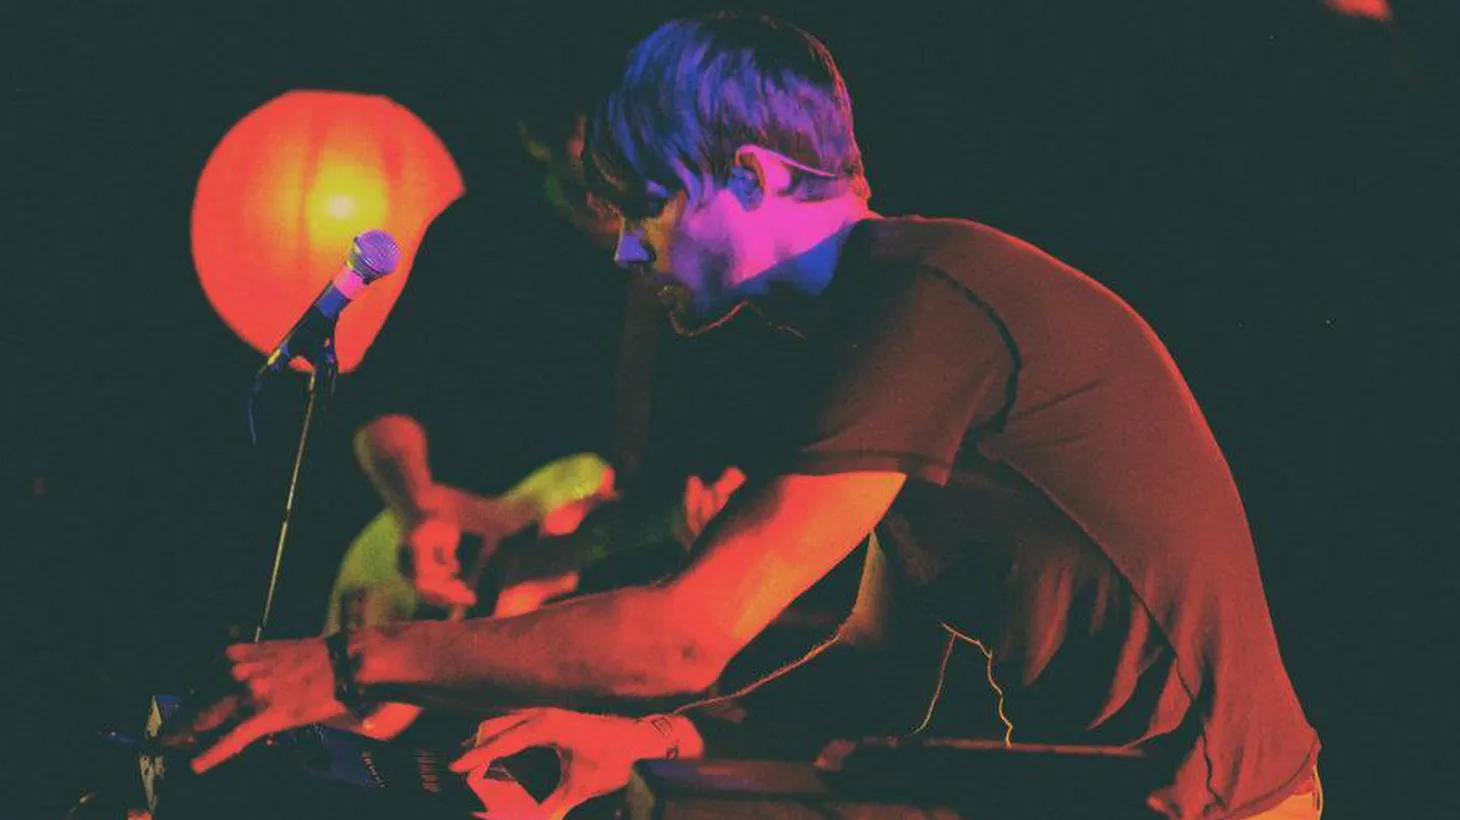 Graphic designer Scott Hansen, also known as Tycho, found his musical identity creating the sonic equivalent of the images he favors in his visual art work.